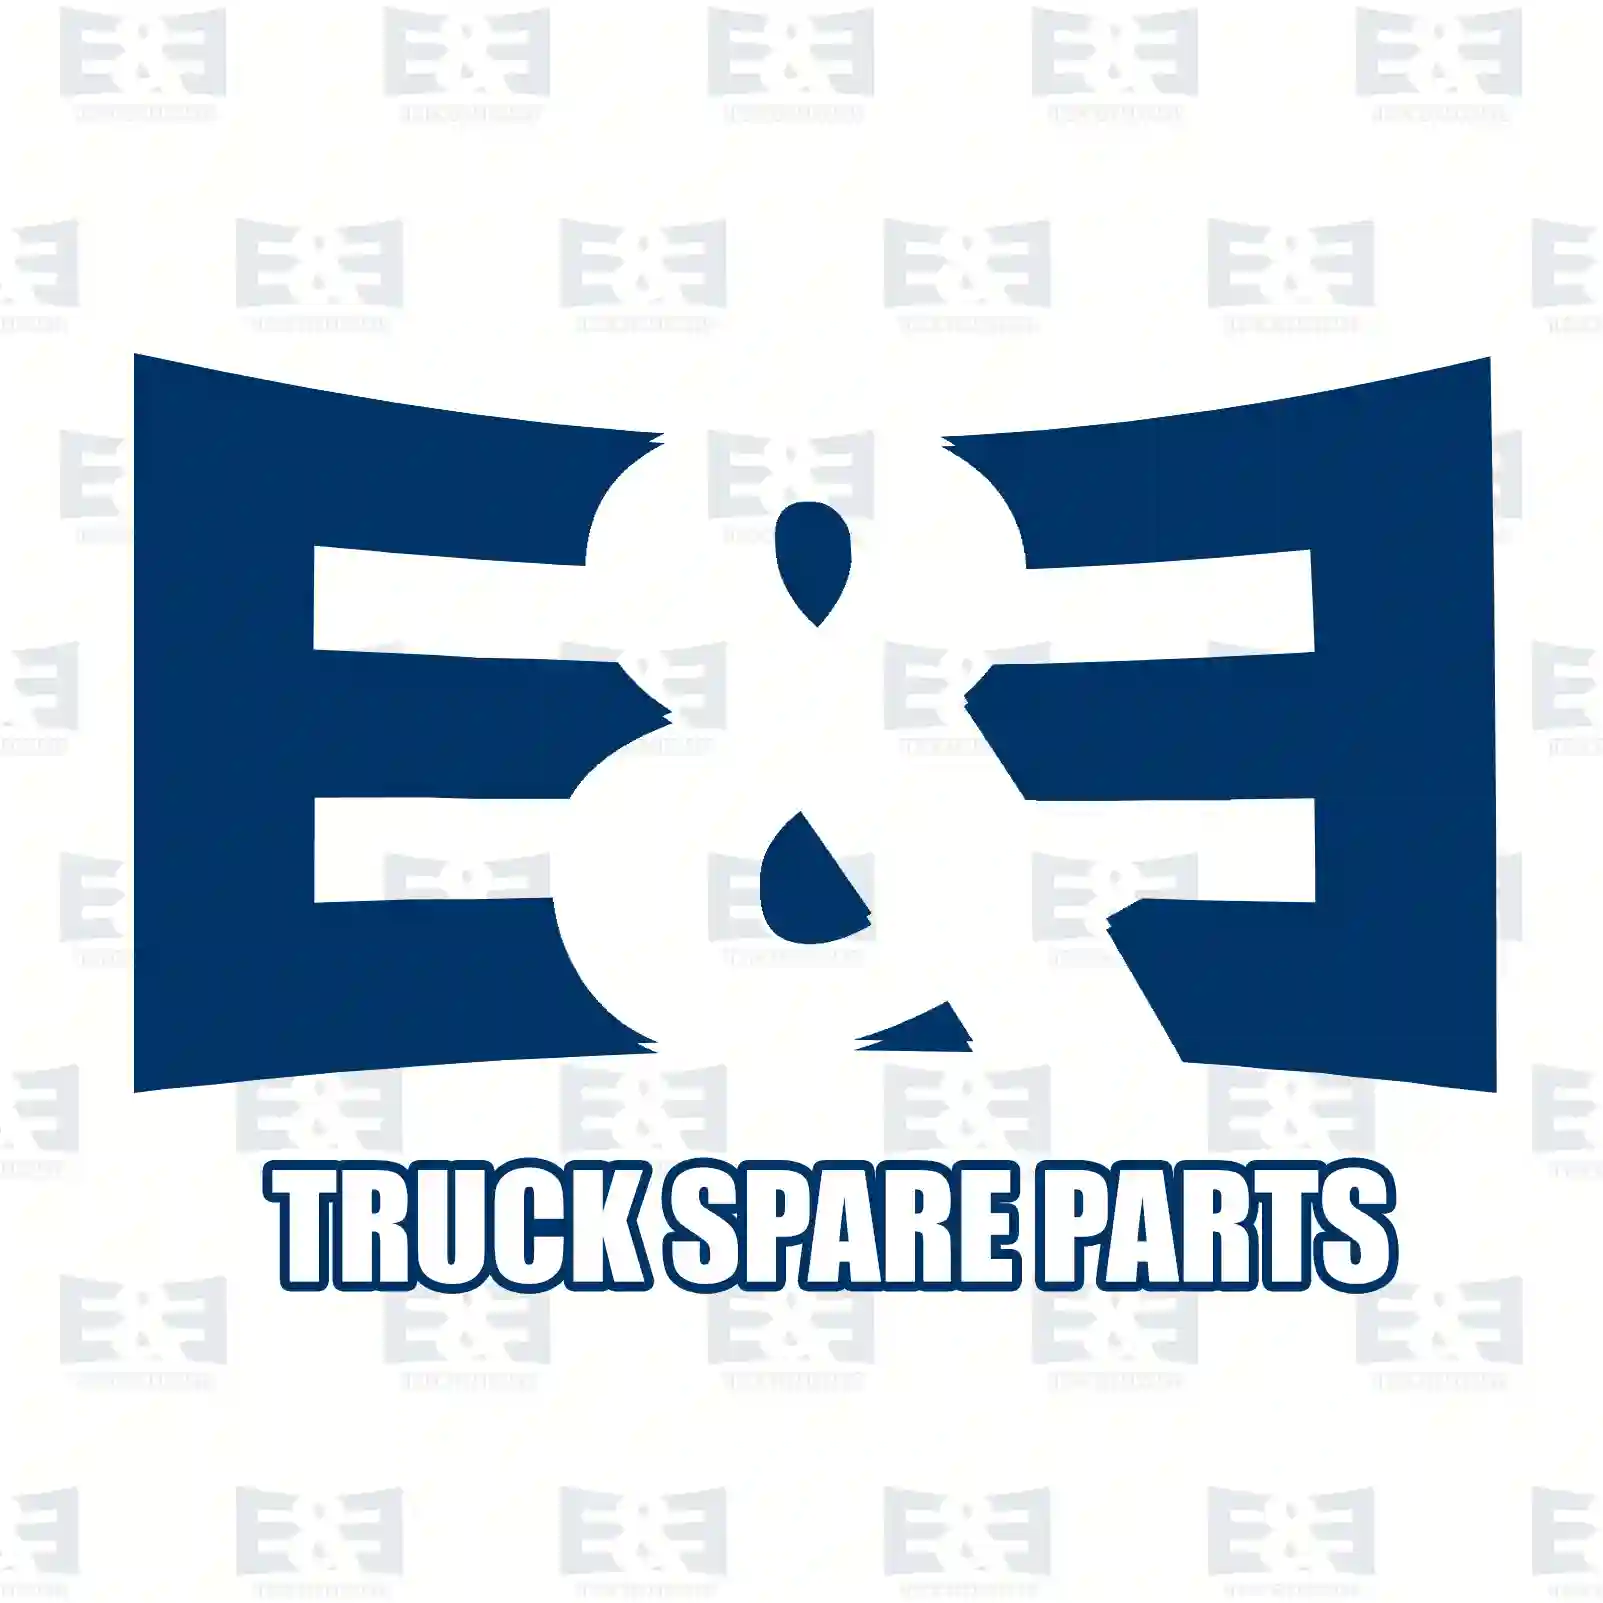  Disc brake pad kit, with accessory kit || E&E Truck Spare Parts | Truck Spare Parts, Auotomotive Spare Parts